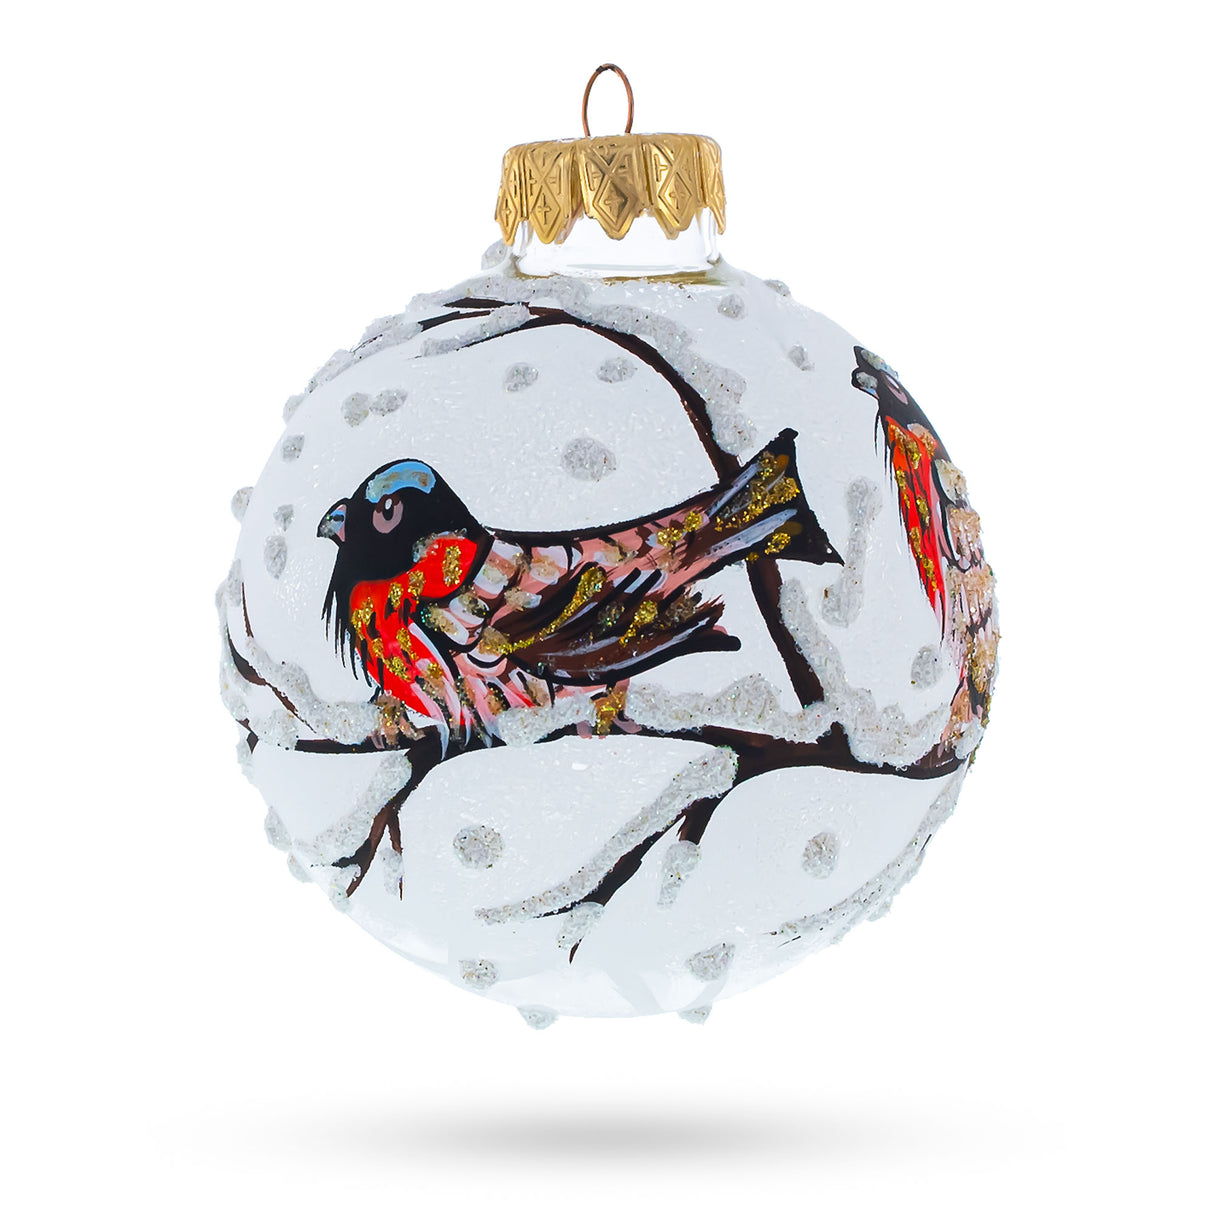 Charming Birds on a Snowy Branch - Blown Glass Ball Christmas Ornament 3.25 Inches in White color, Round shape